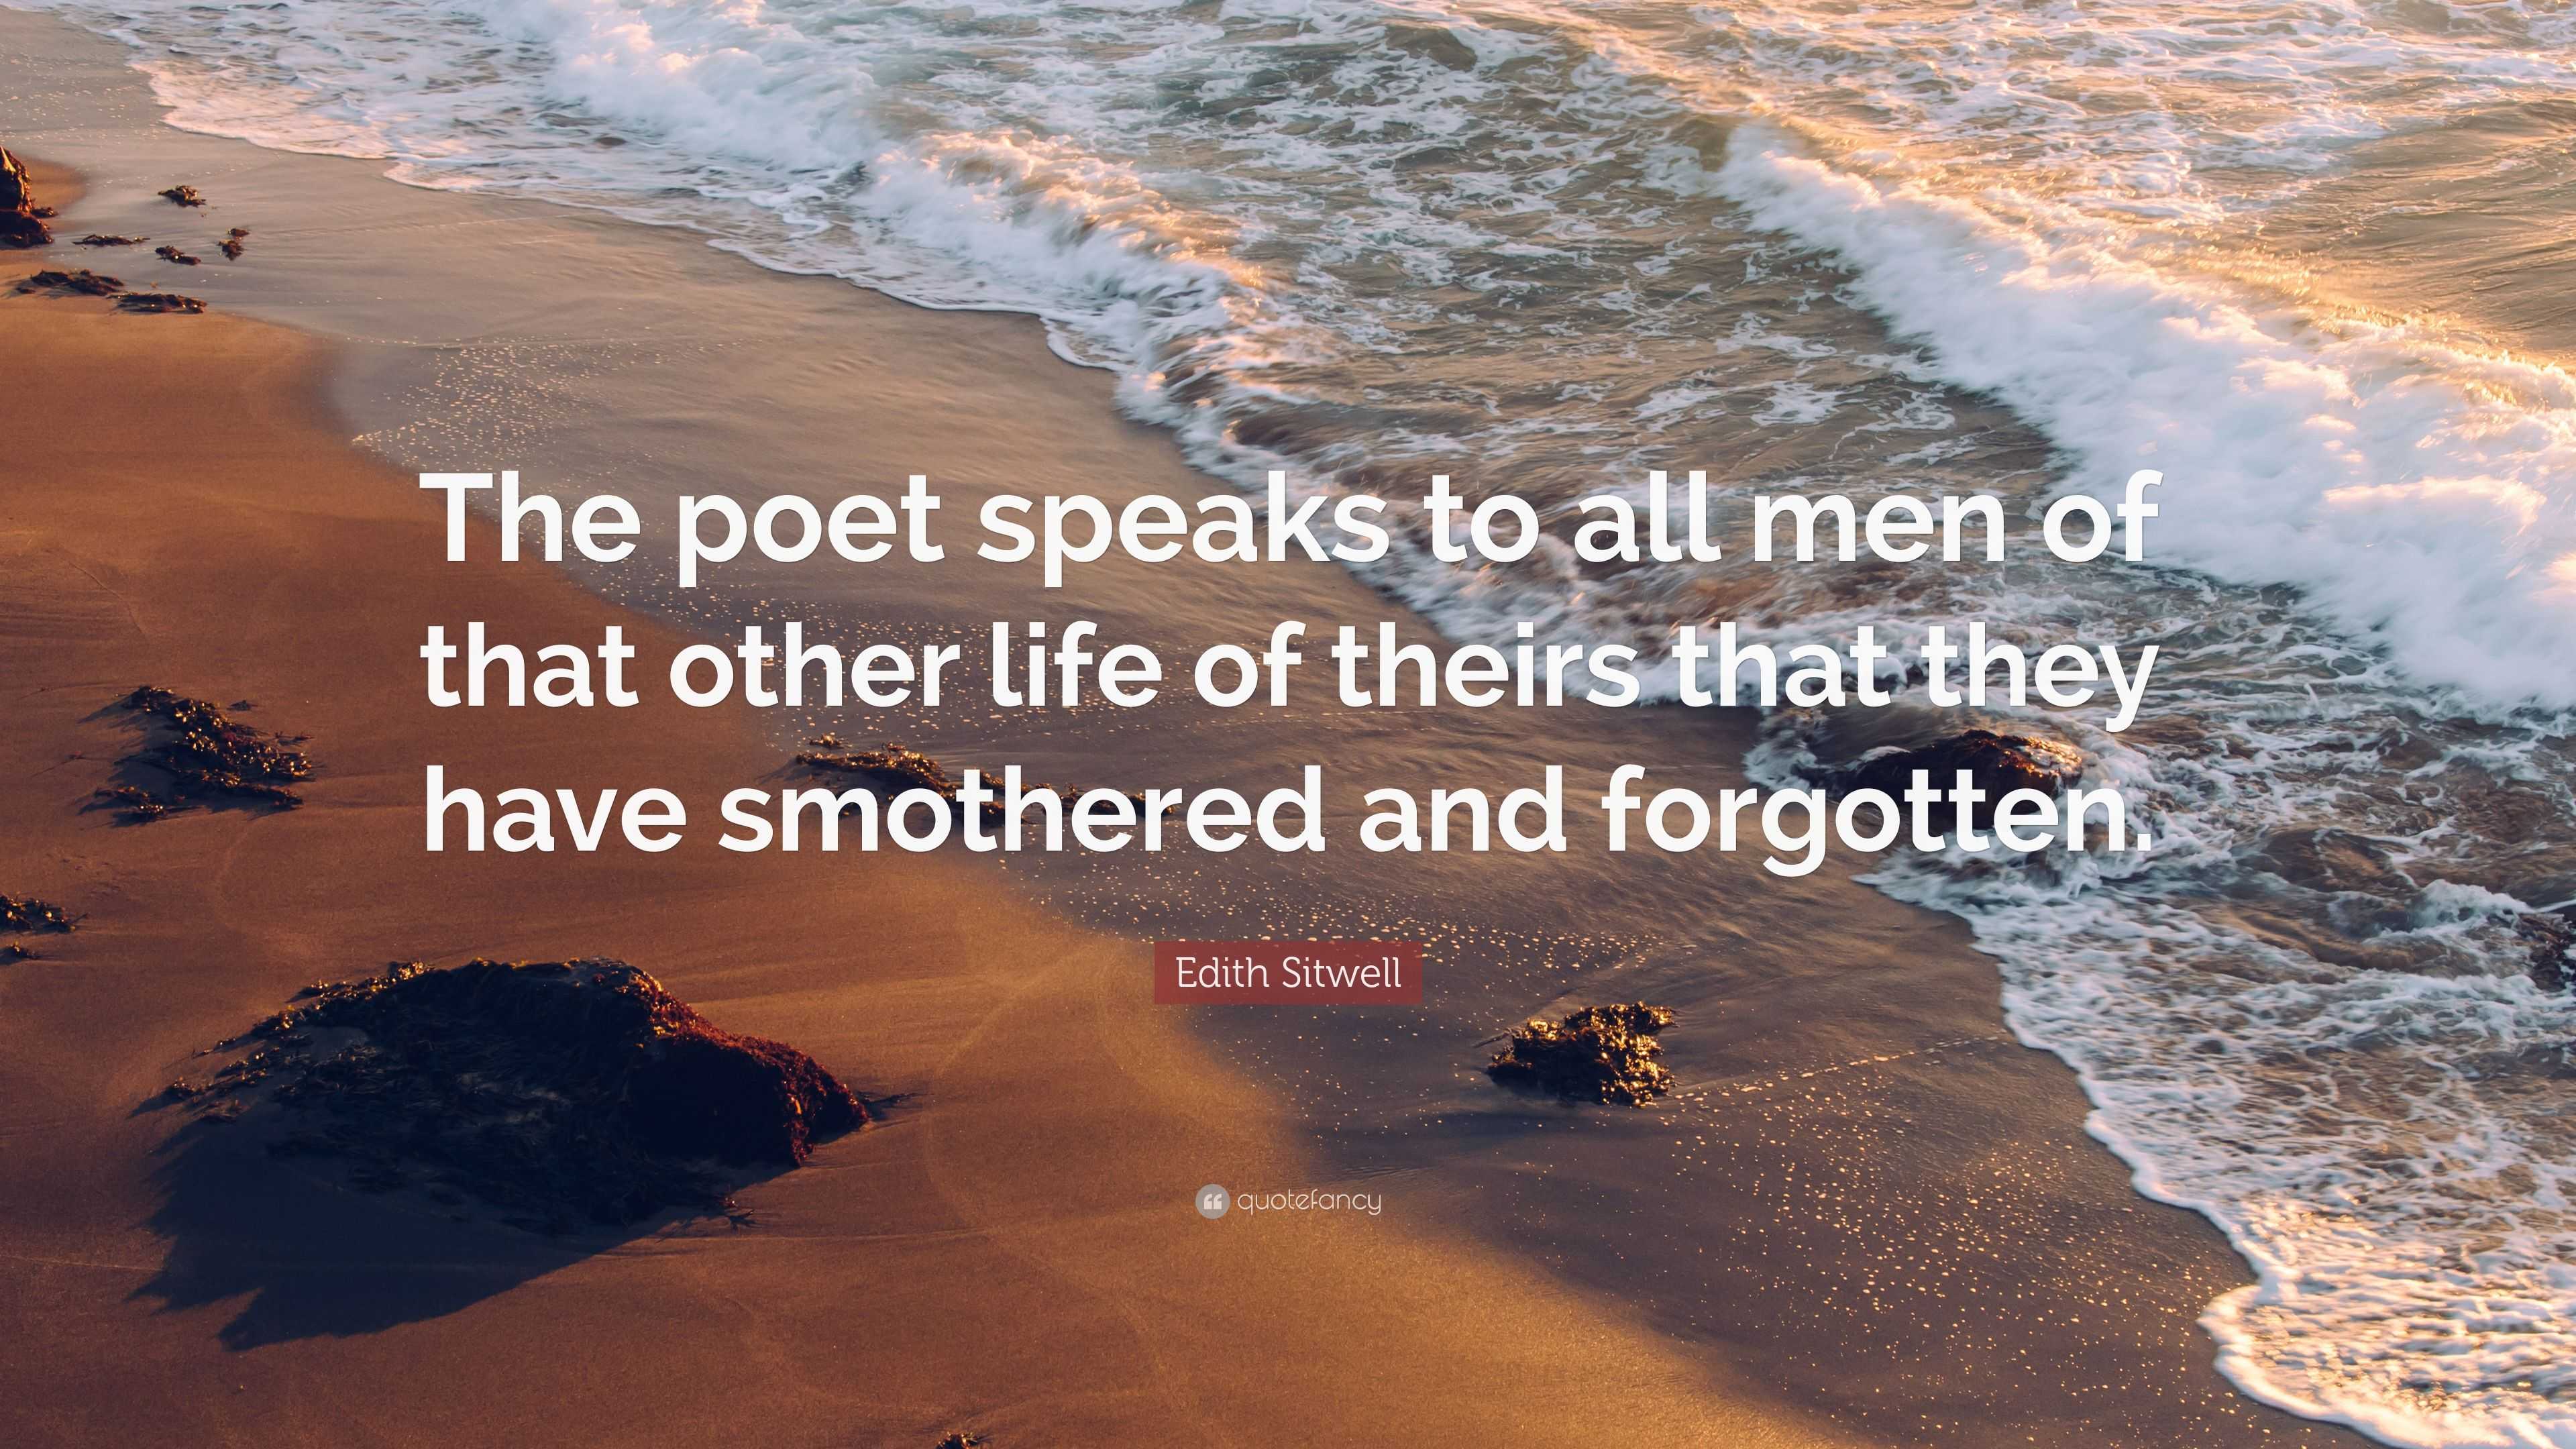 Edith Sitwell Quote: “The poet speaks to all men of that other life of